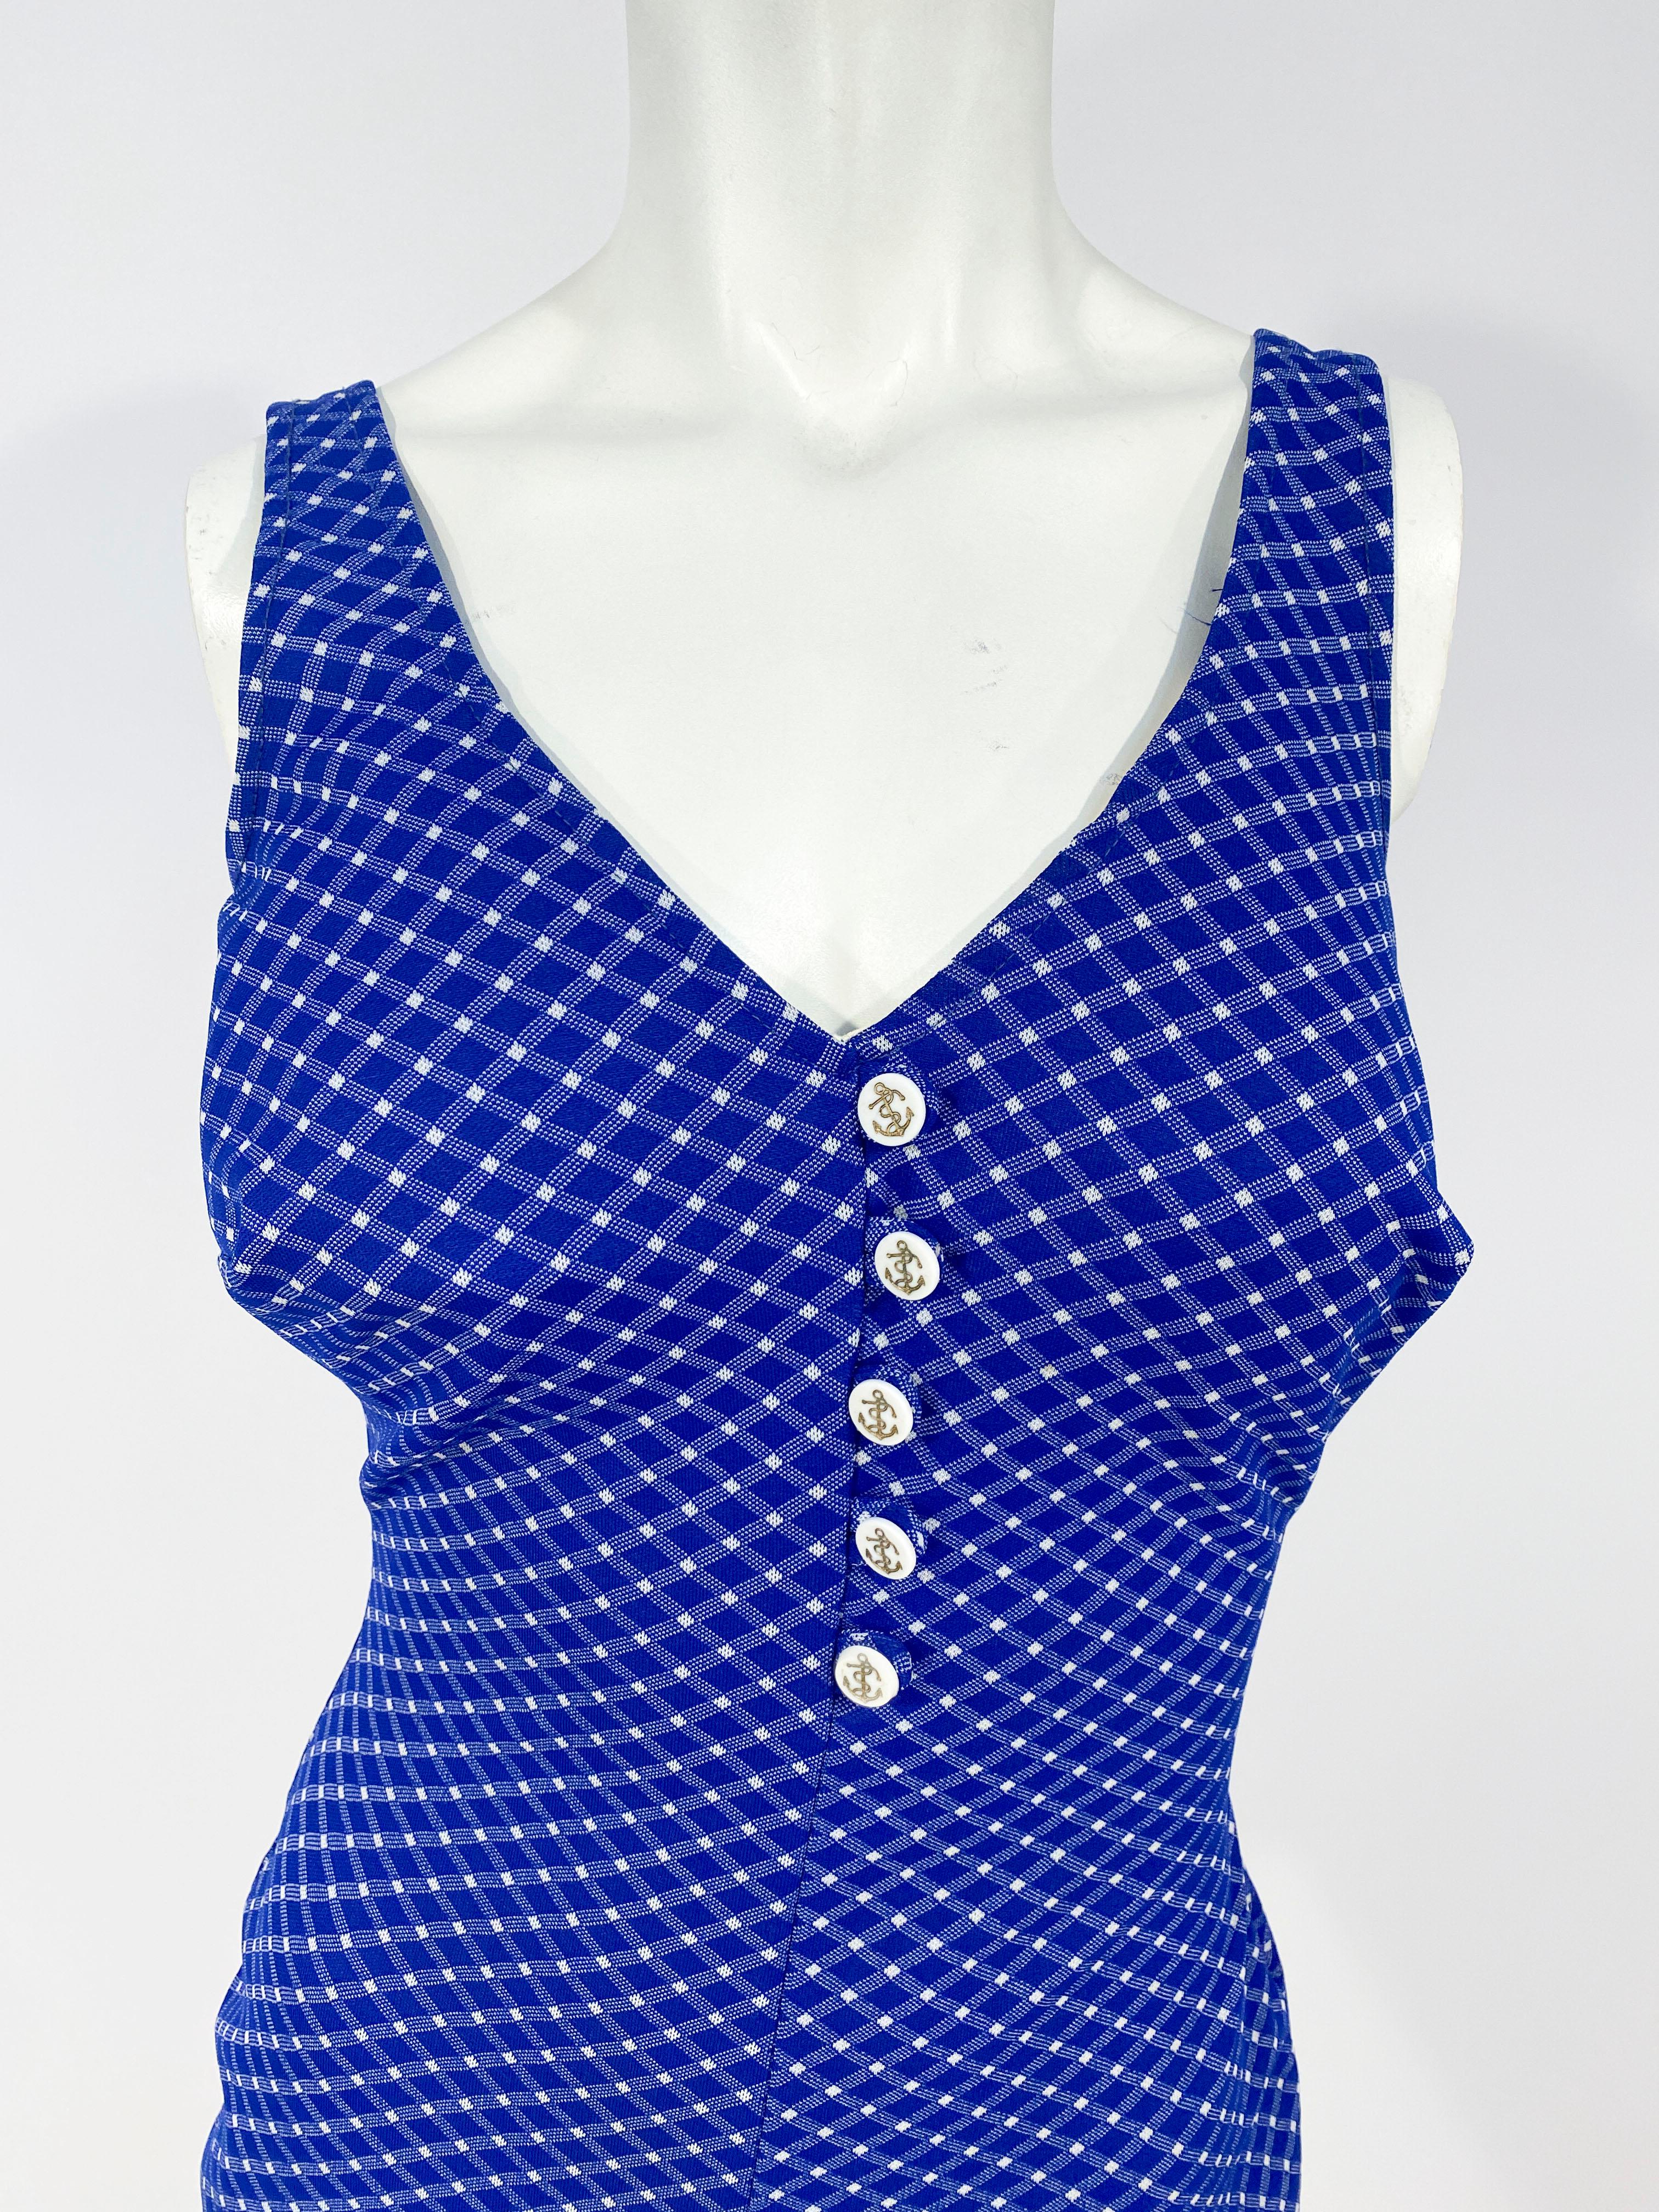 1960s blue and white gingham pattern bathing suit decorated with gold painted anchor buttons and a plunging backline. This piece has a builtin bra for support and the textile has ample stretch to accommodate a wide range of sizes. 